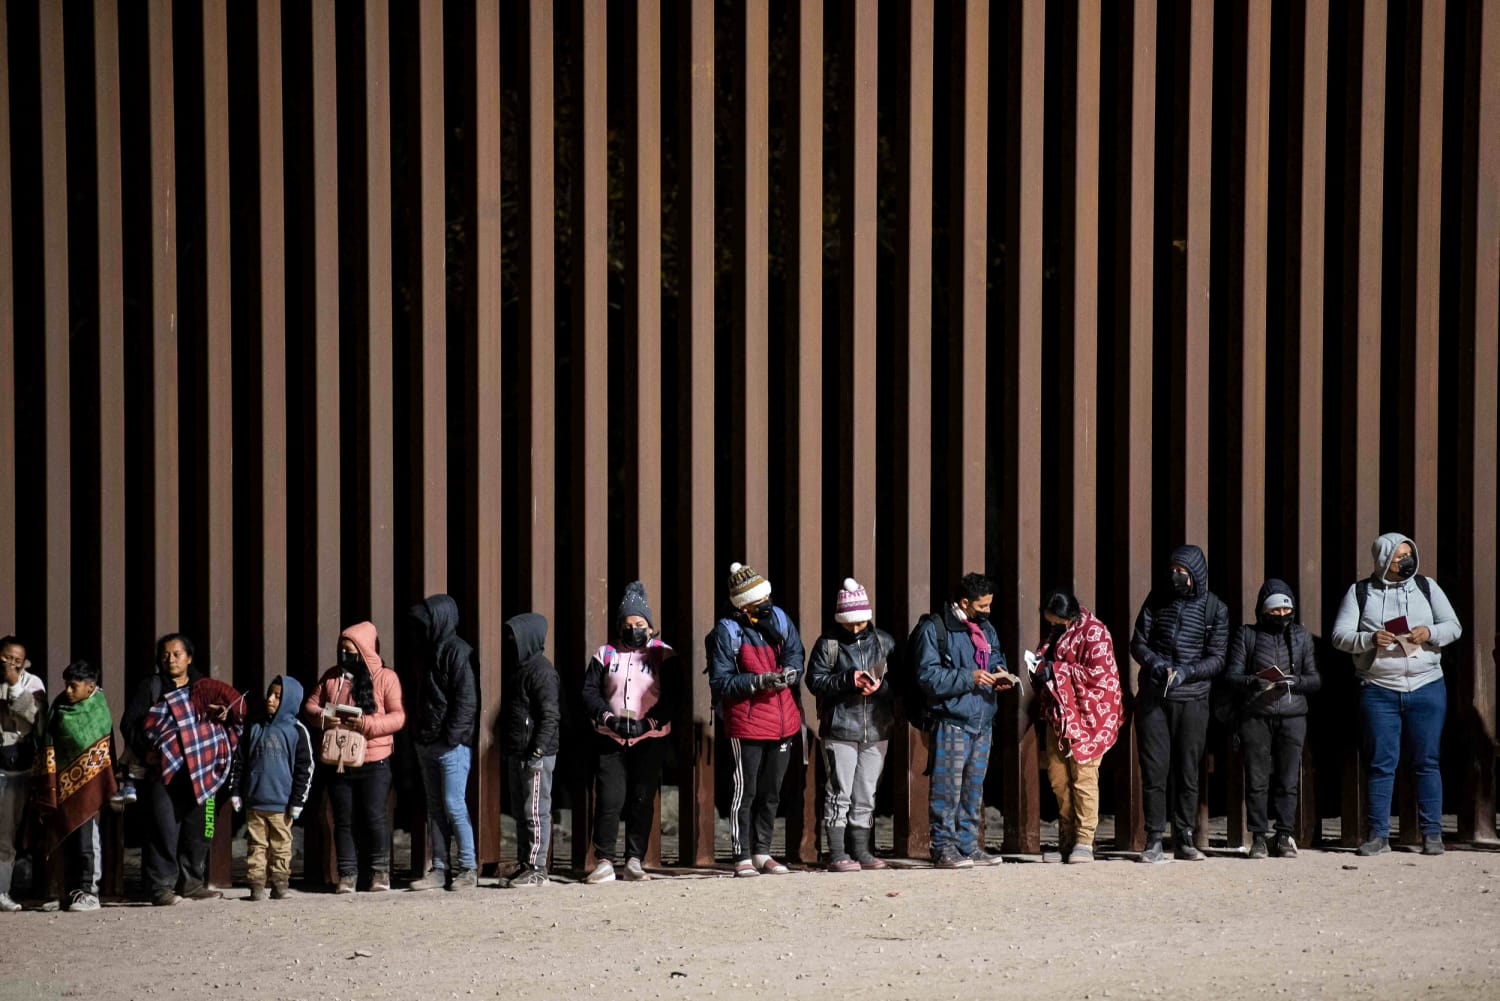 Sharp drop in illegal border crossings continued in February, U.S. says